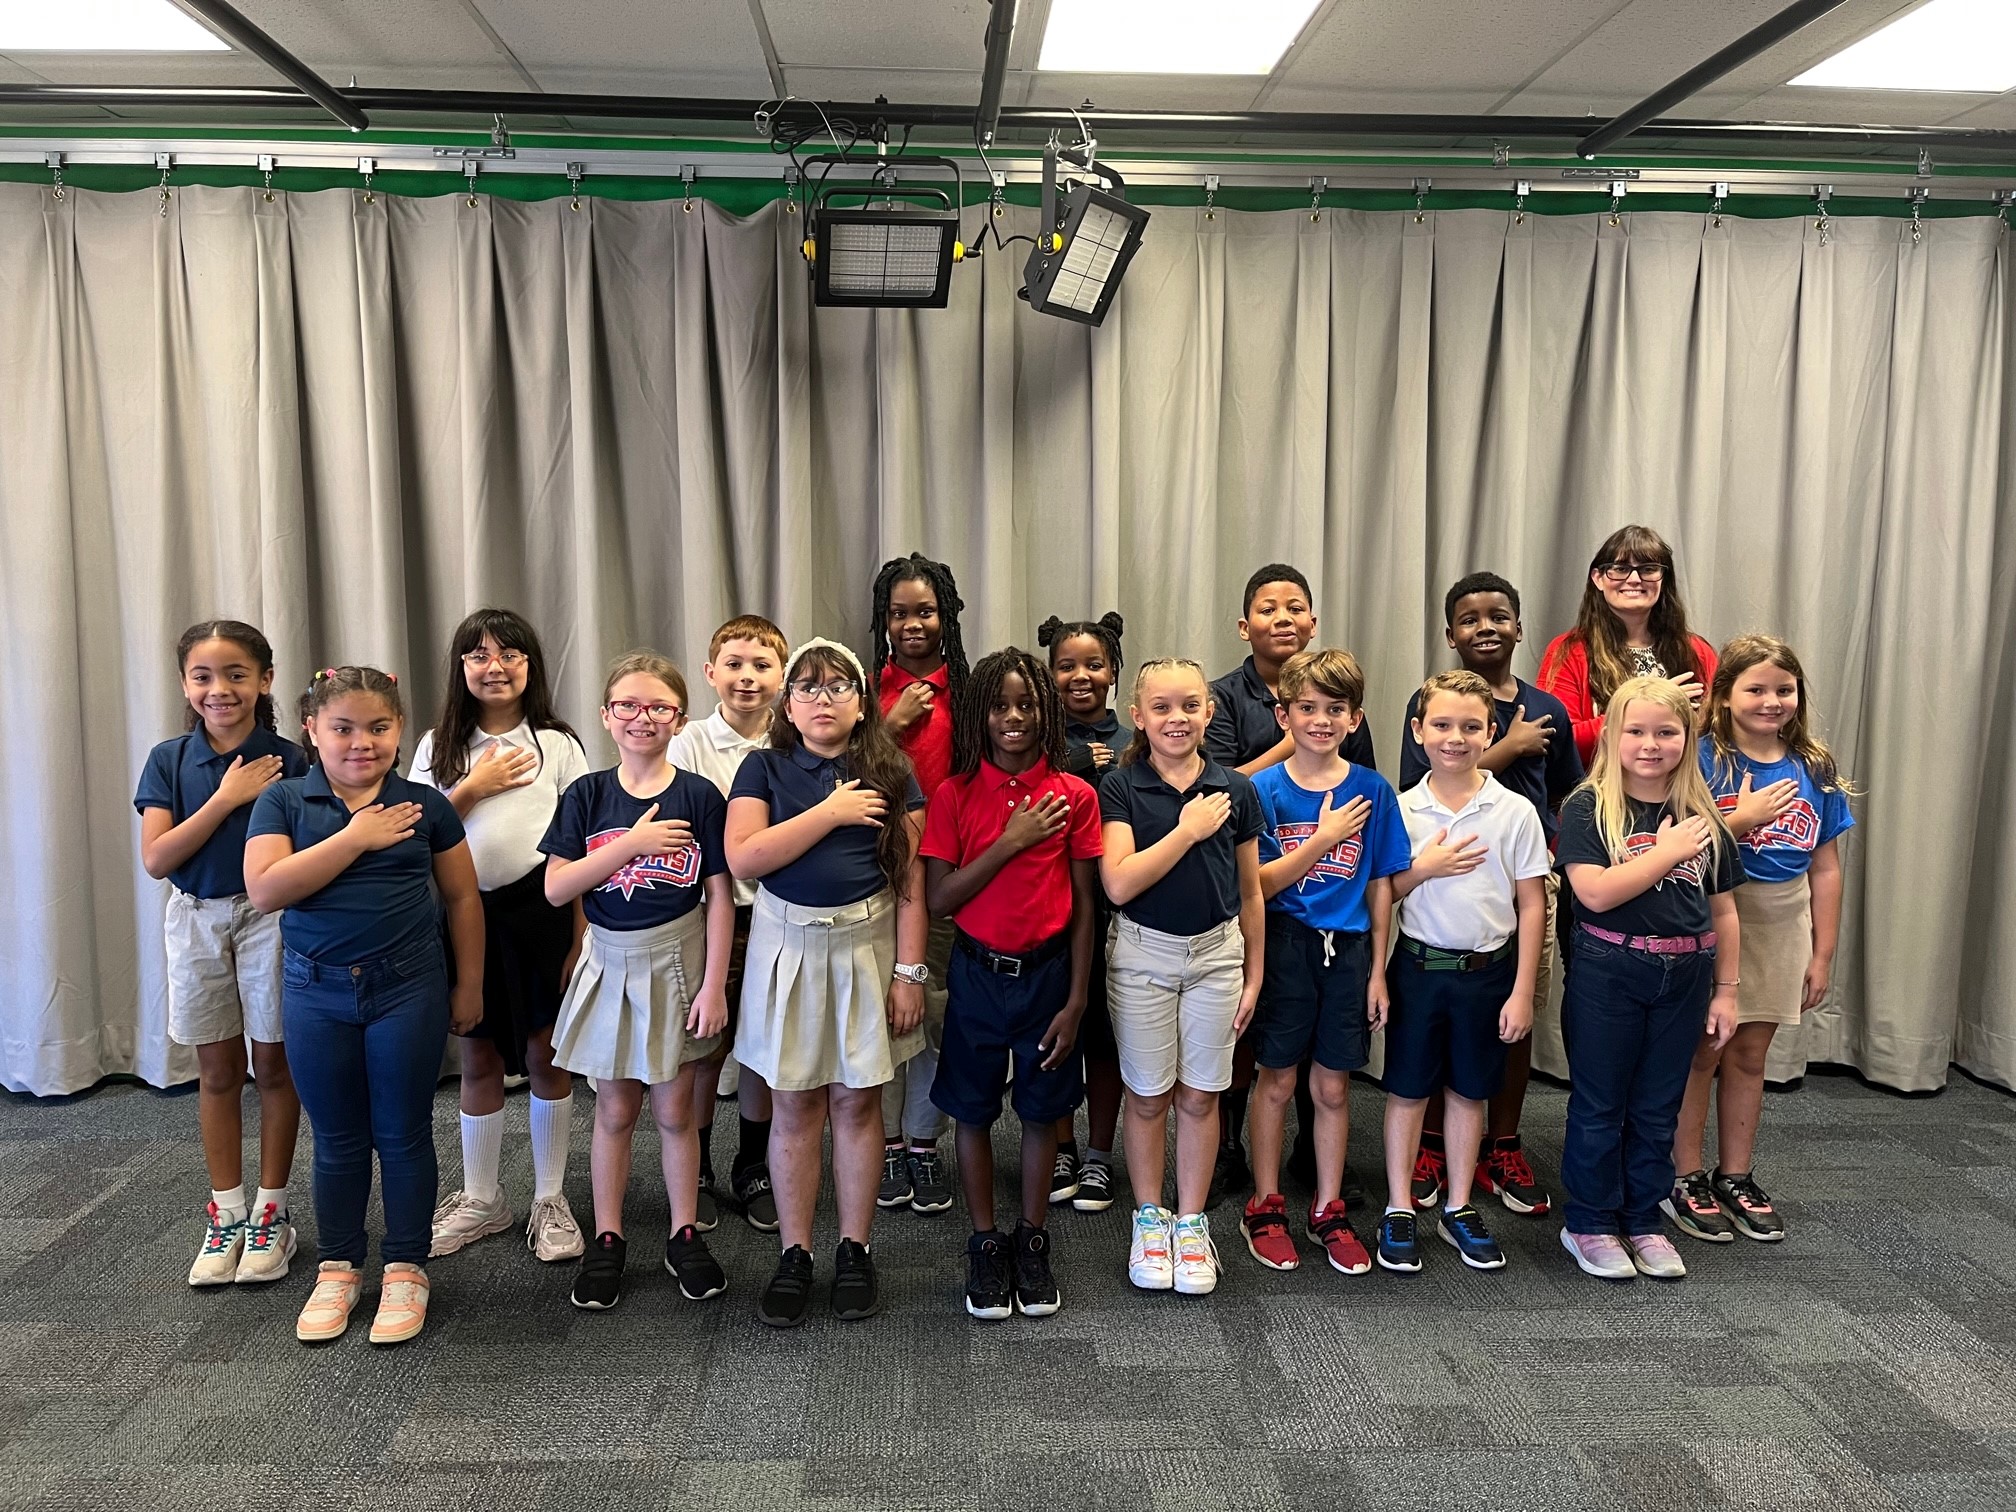 Class of the Day – Ms. Bendall’s Third Grade Class